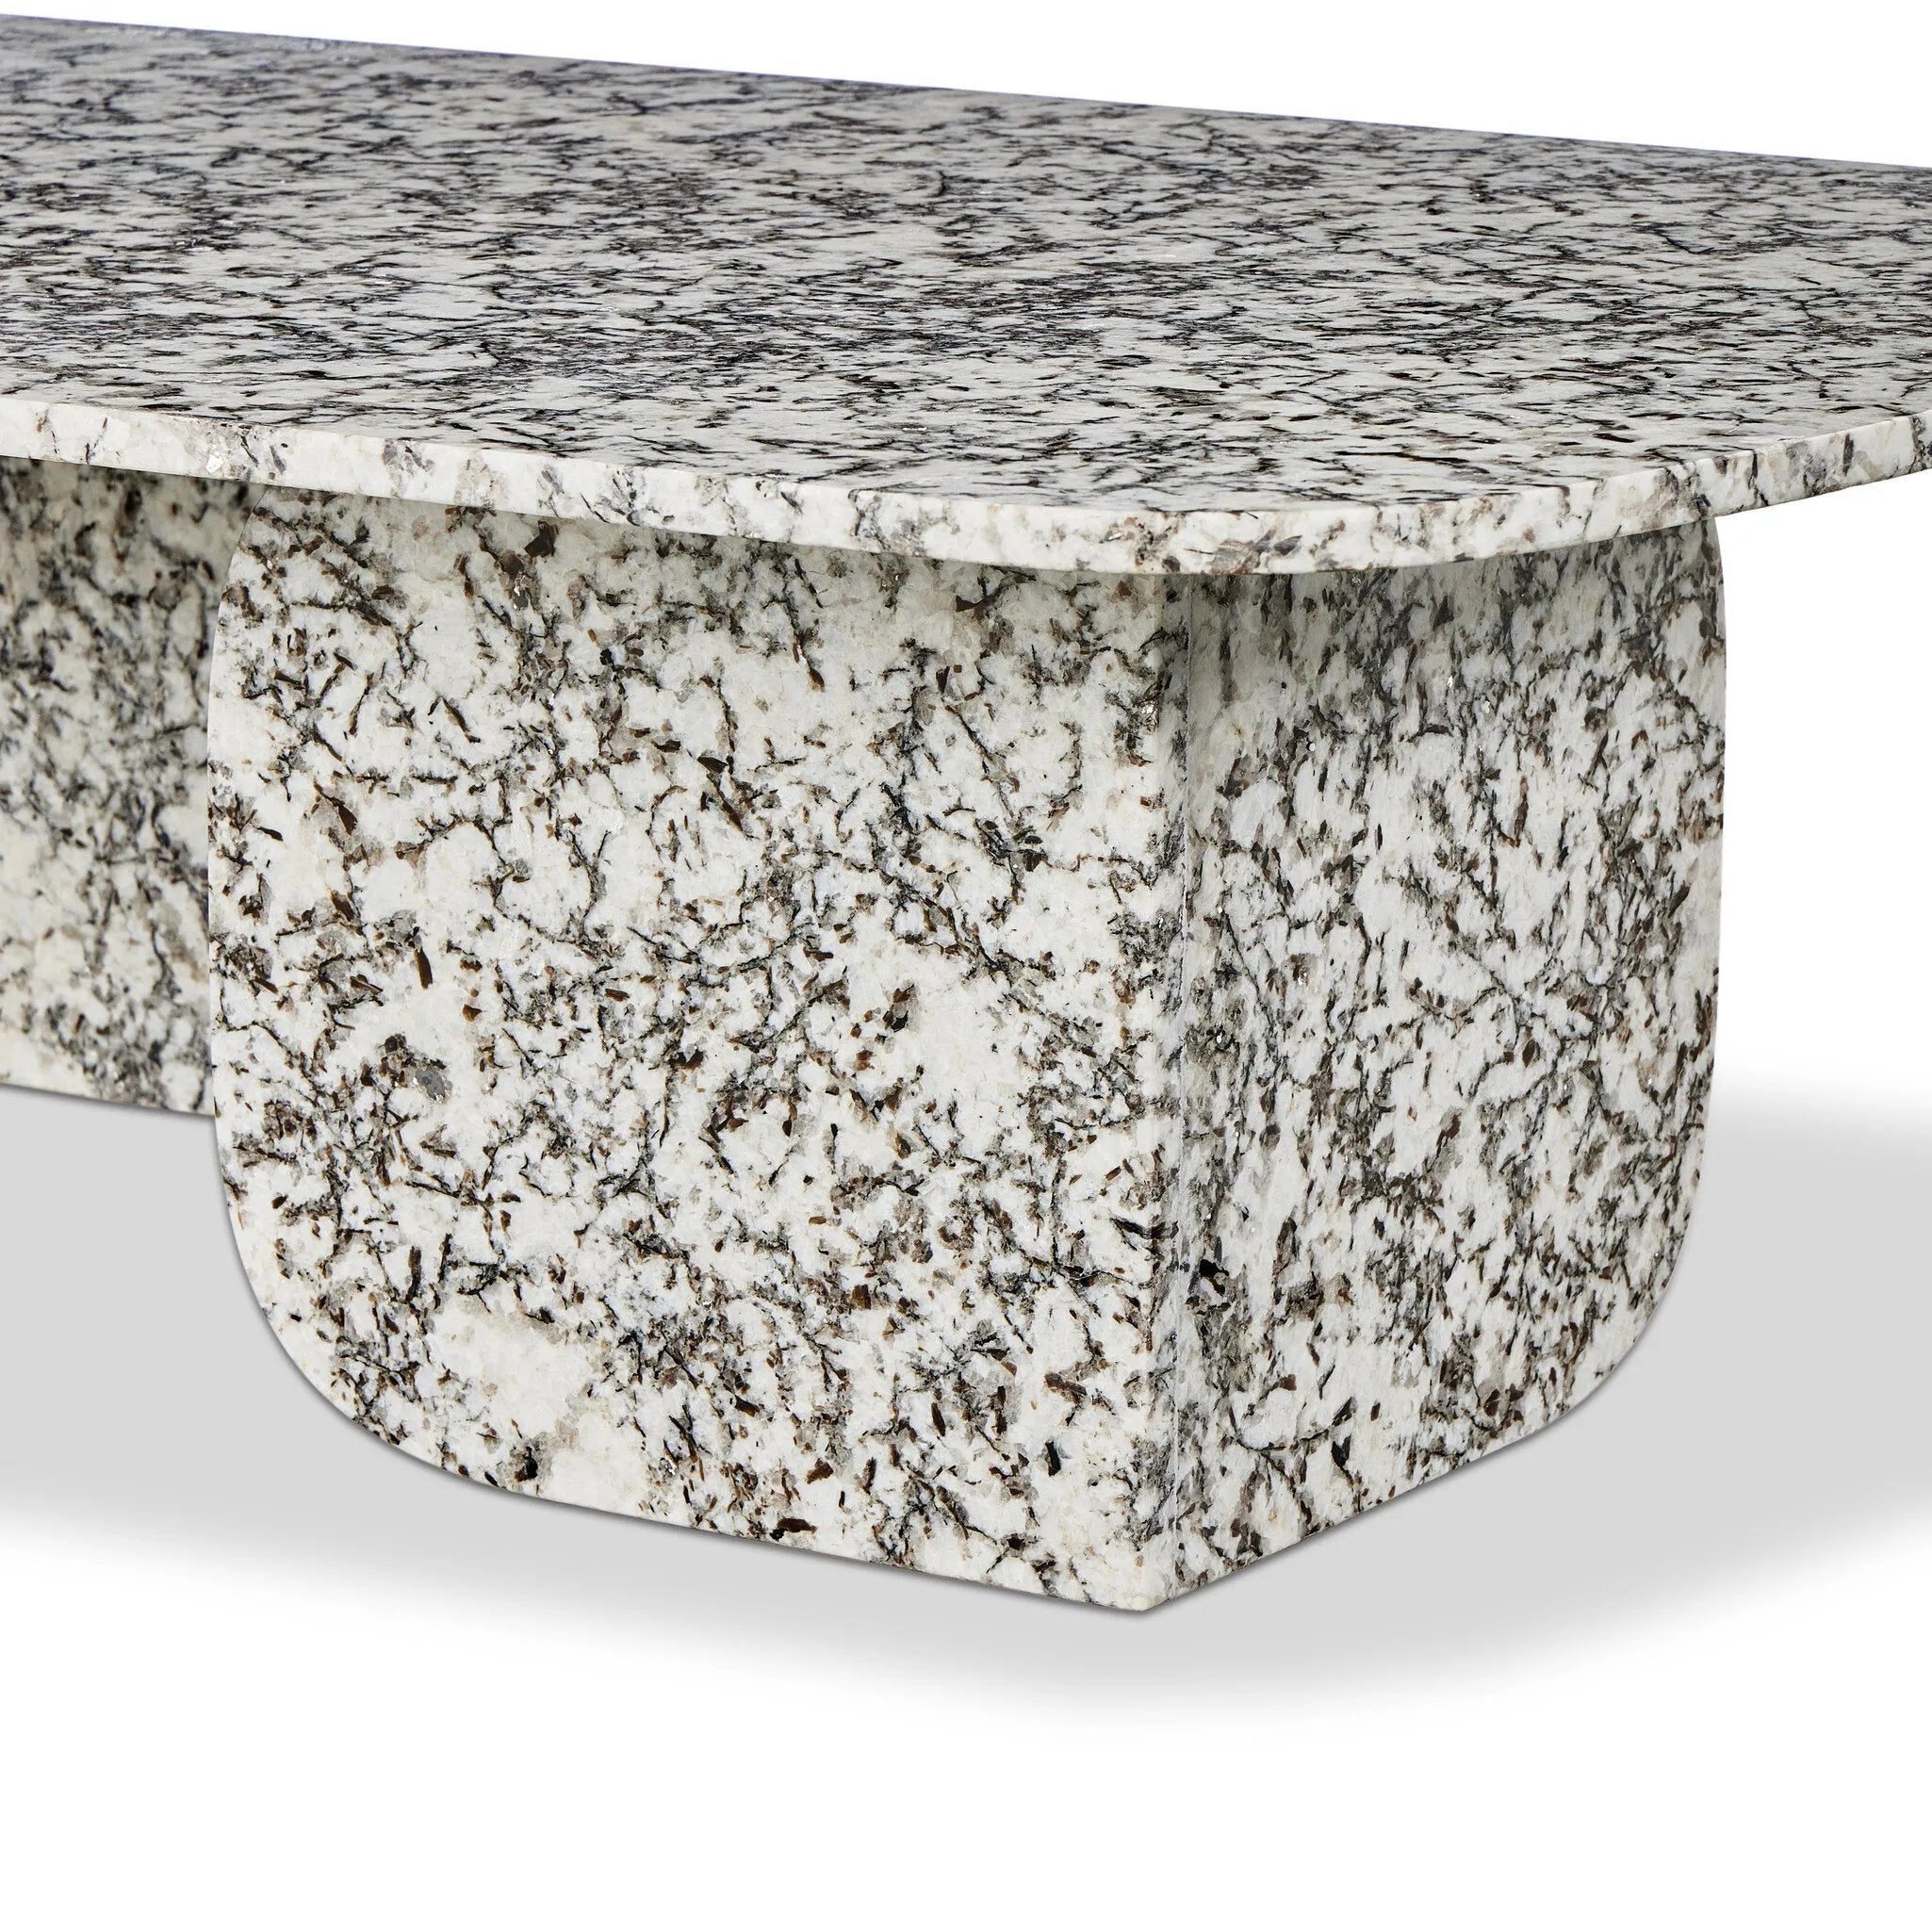 Speckled black marble shapes a unique coffee table with softened corners and subtle Eighties vibes.Collection: Marlo Amethyst Home provides interior design, new home construction design consulting, vintage area rugs, and lighting in the Monterey metro area.